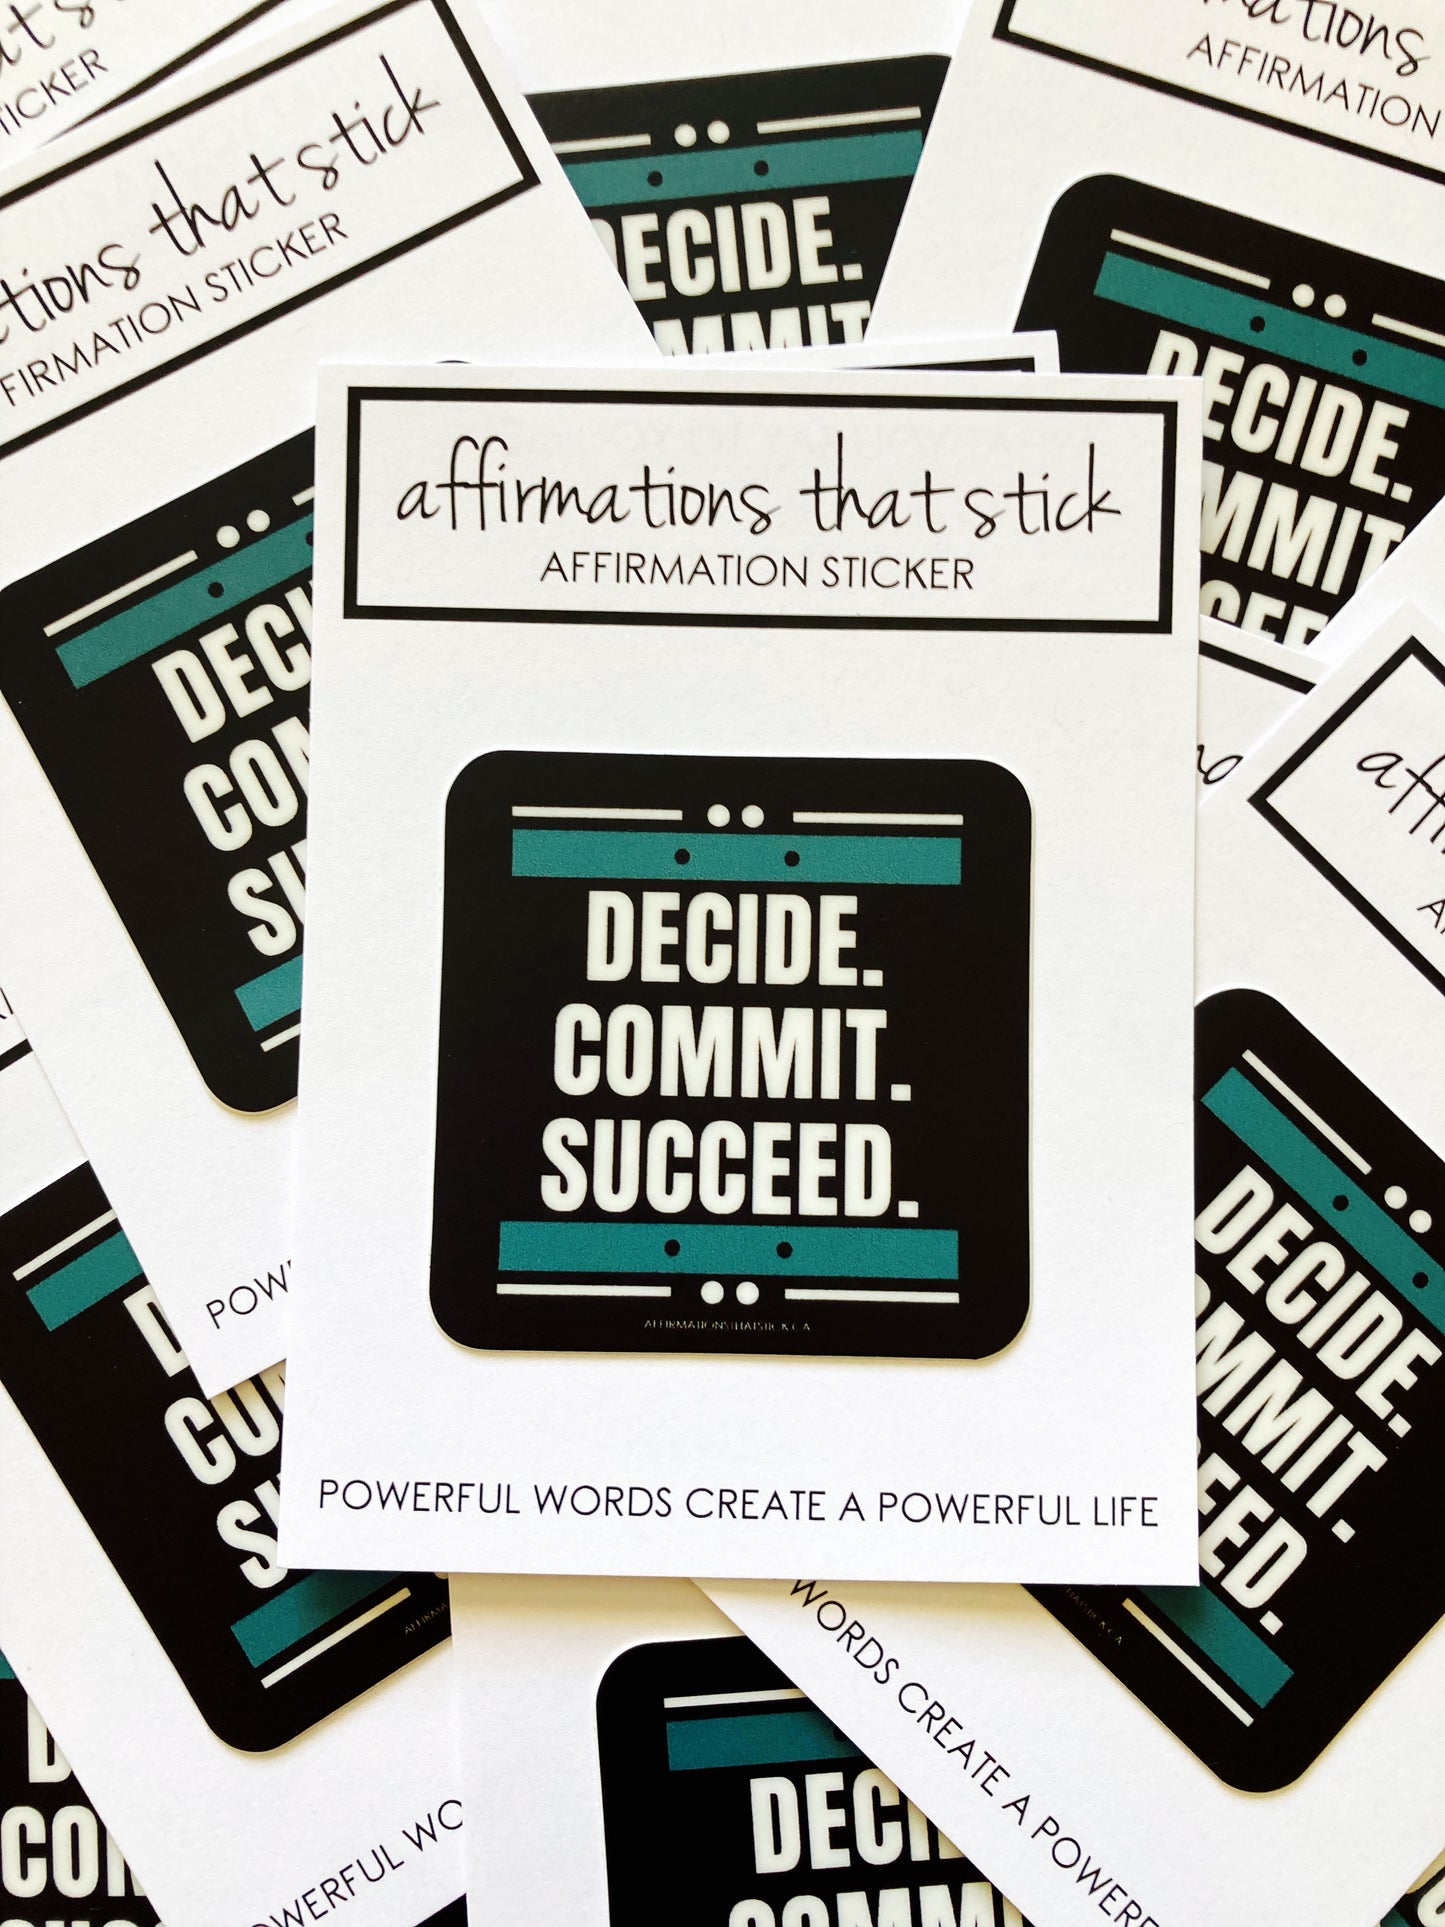 Decide. Commit. Succeed Affirmation Sticker-Affirmations That Stick CA